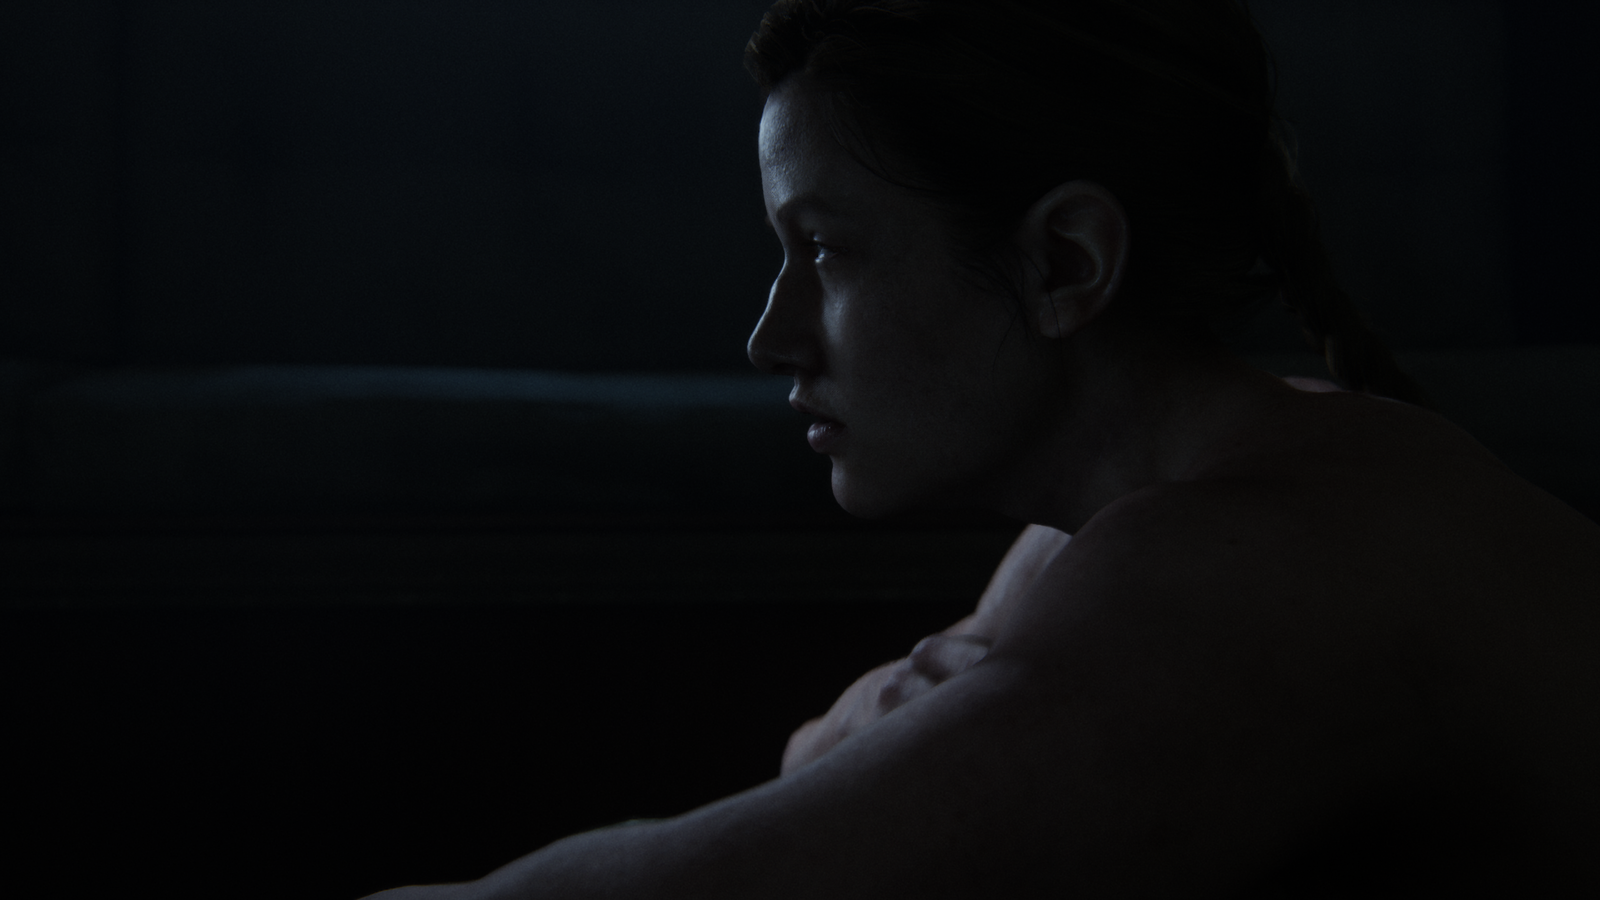 We Should Be Concerned About Lev, Not Abby, In The Last Of Us Season Two